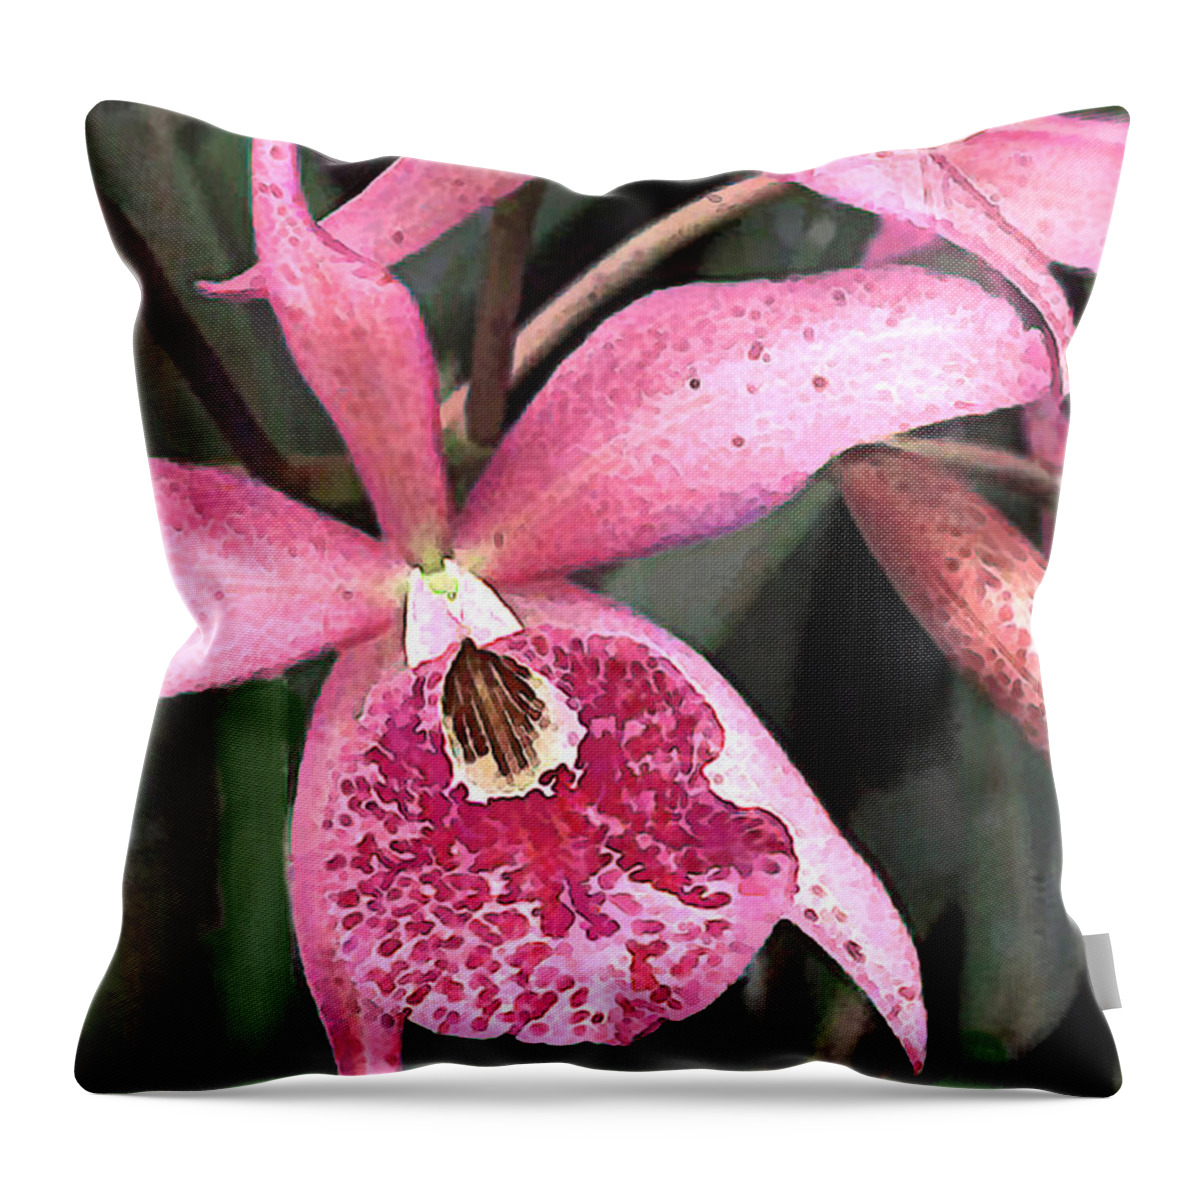 Orchid Throw Pillow featuring the painting Pink Spotted Cattleya Orchids by Elaine Plesser